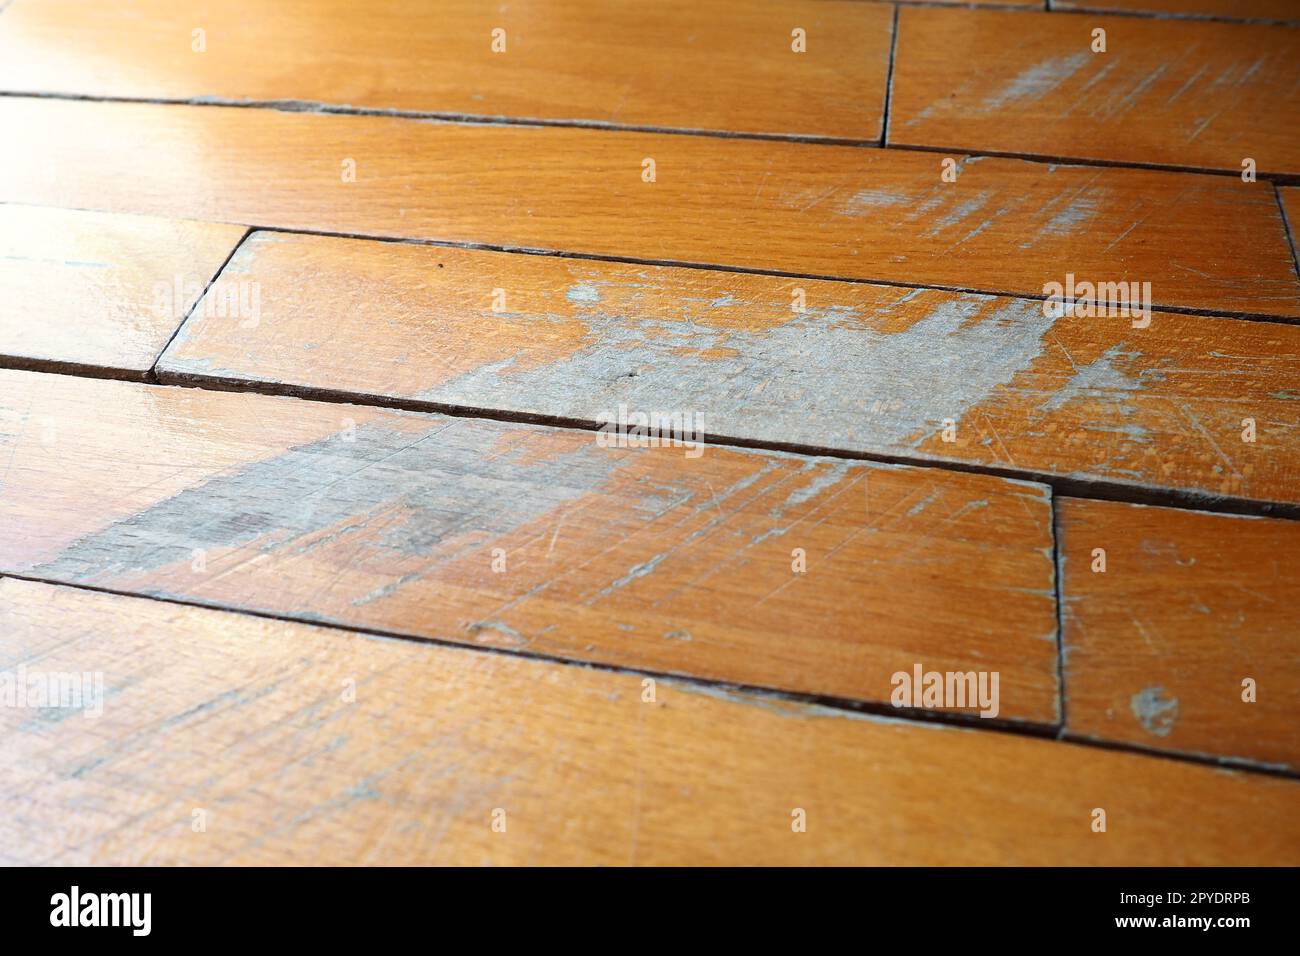 Old, scratched parquet flooring needs maintenance. The parquet is damaged by scratches from prolonged use Stock Photo